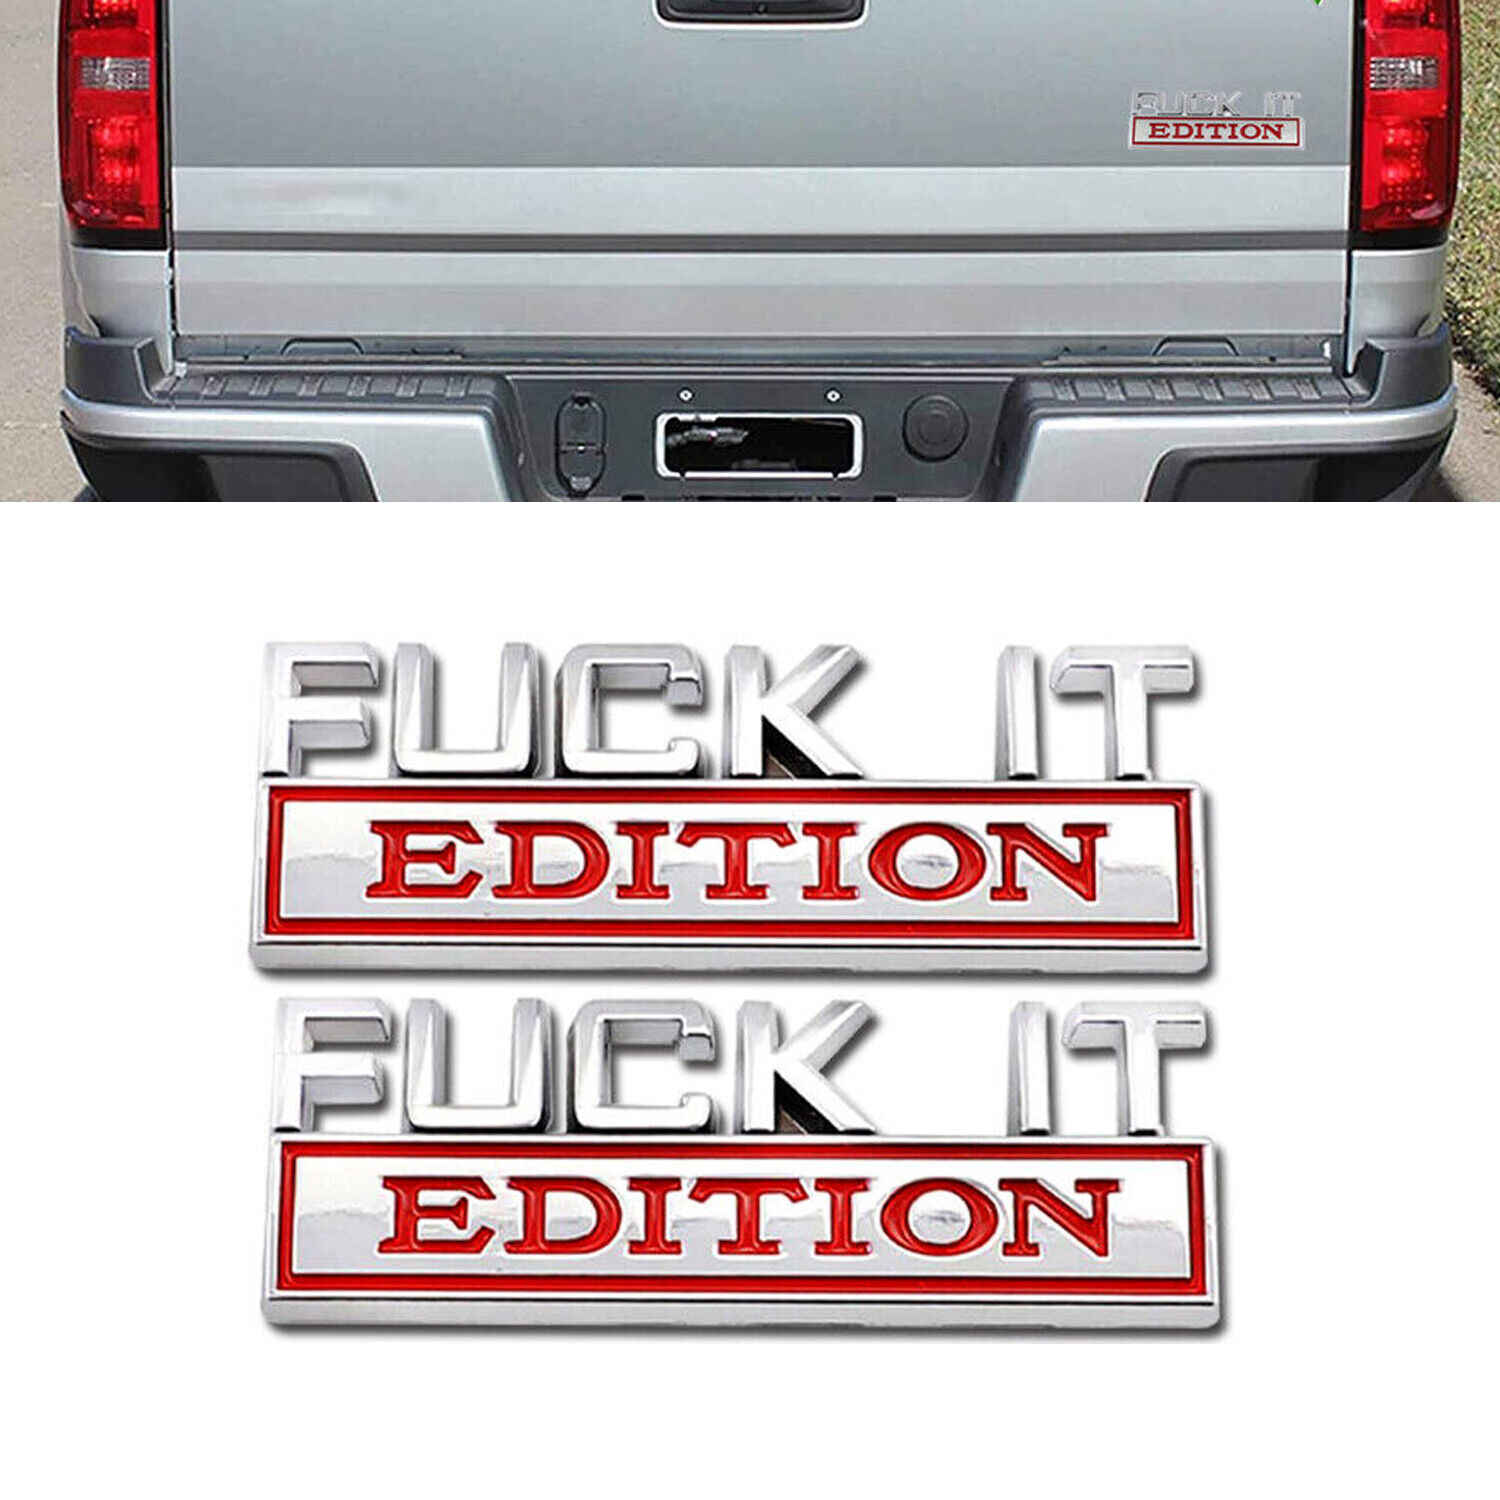 2x FUCK-IT EDITION Emblem Badge Decal Sticker for Car Truck Fit All Silver Red